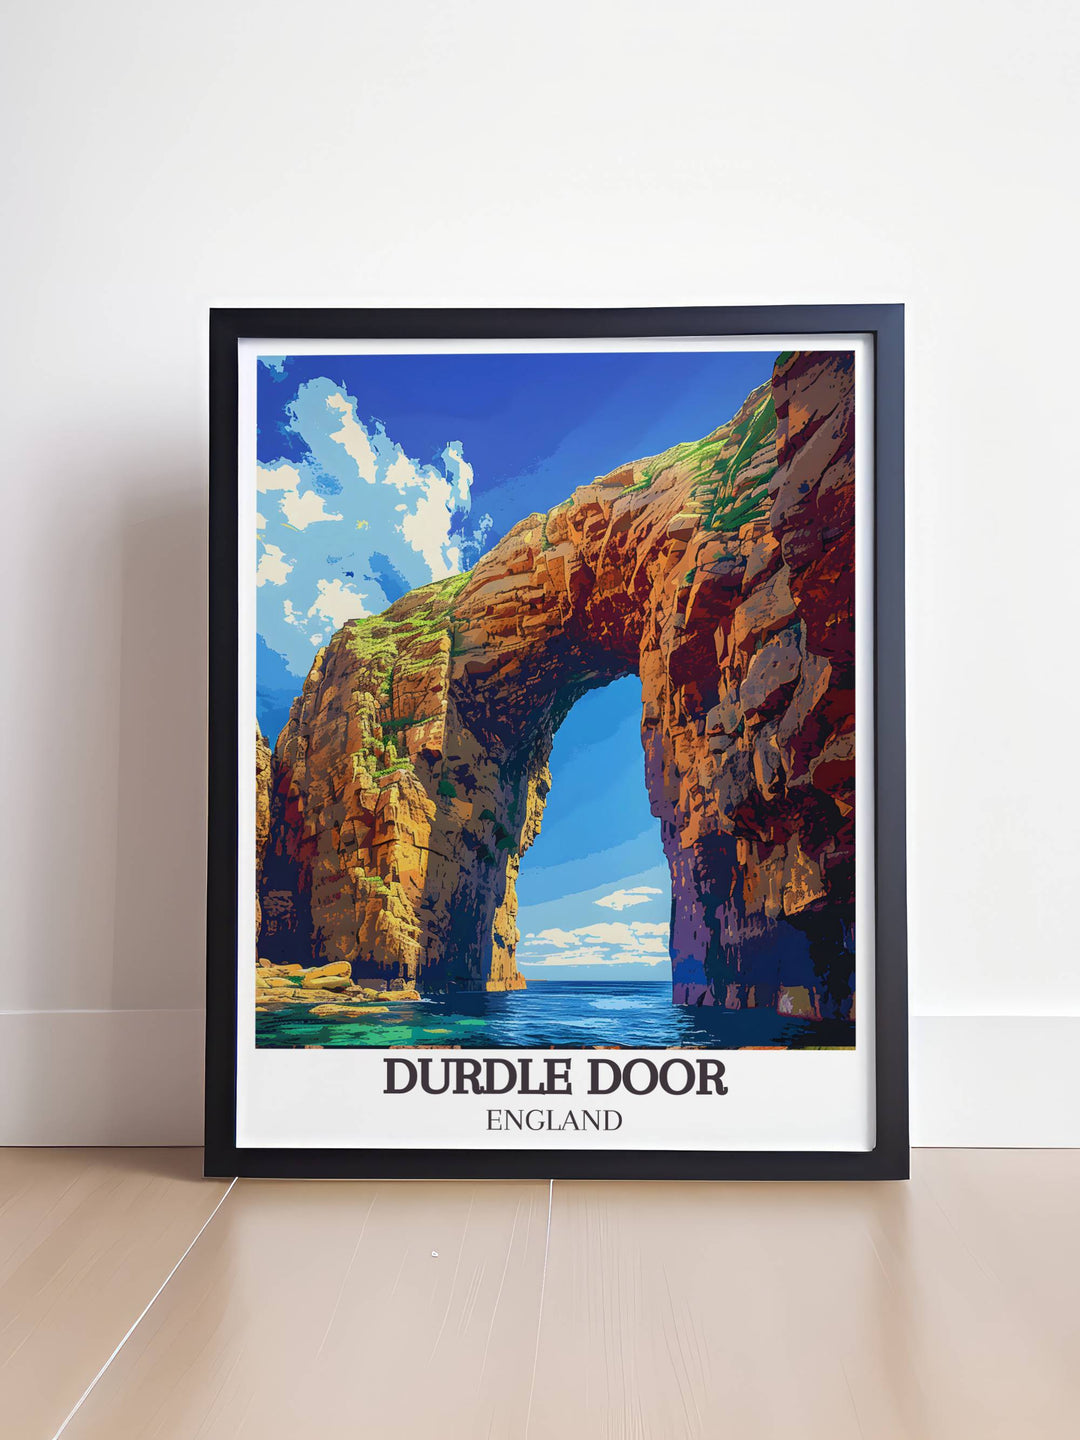 Majestic view of Durdle Door Arch on the Jurassic Coast of Dorset perfect for Dorset posters prints and wall art bringing the natural wonder of this iconic landmark into your home as a beautiful and timeless piece of artwork and photography.